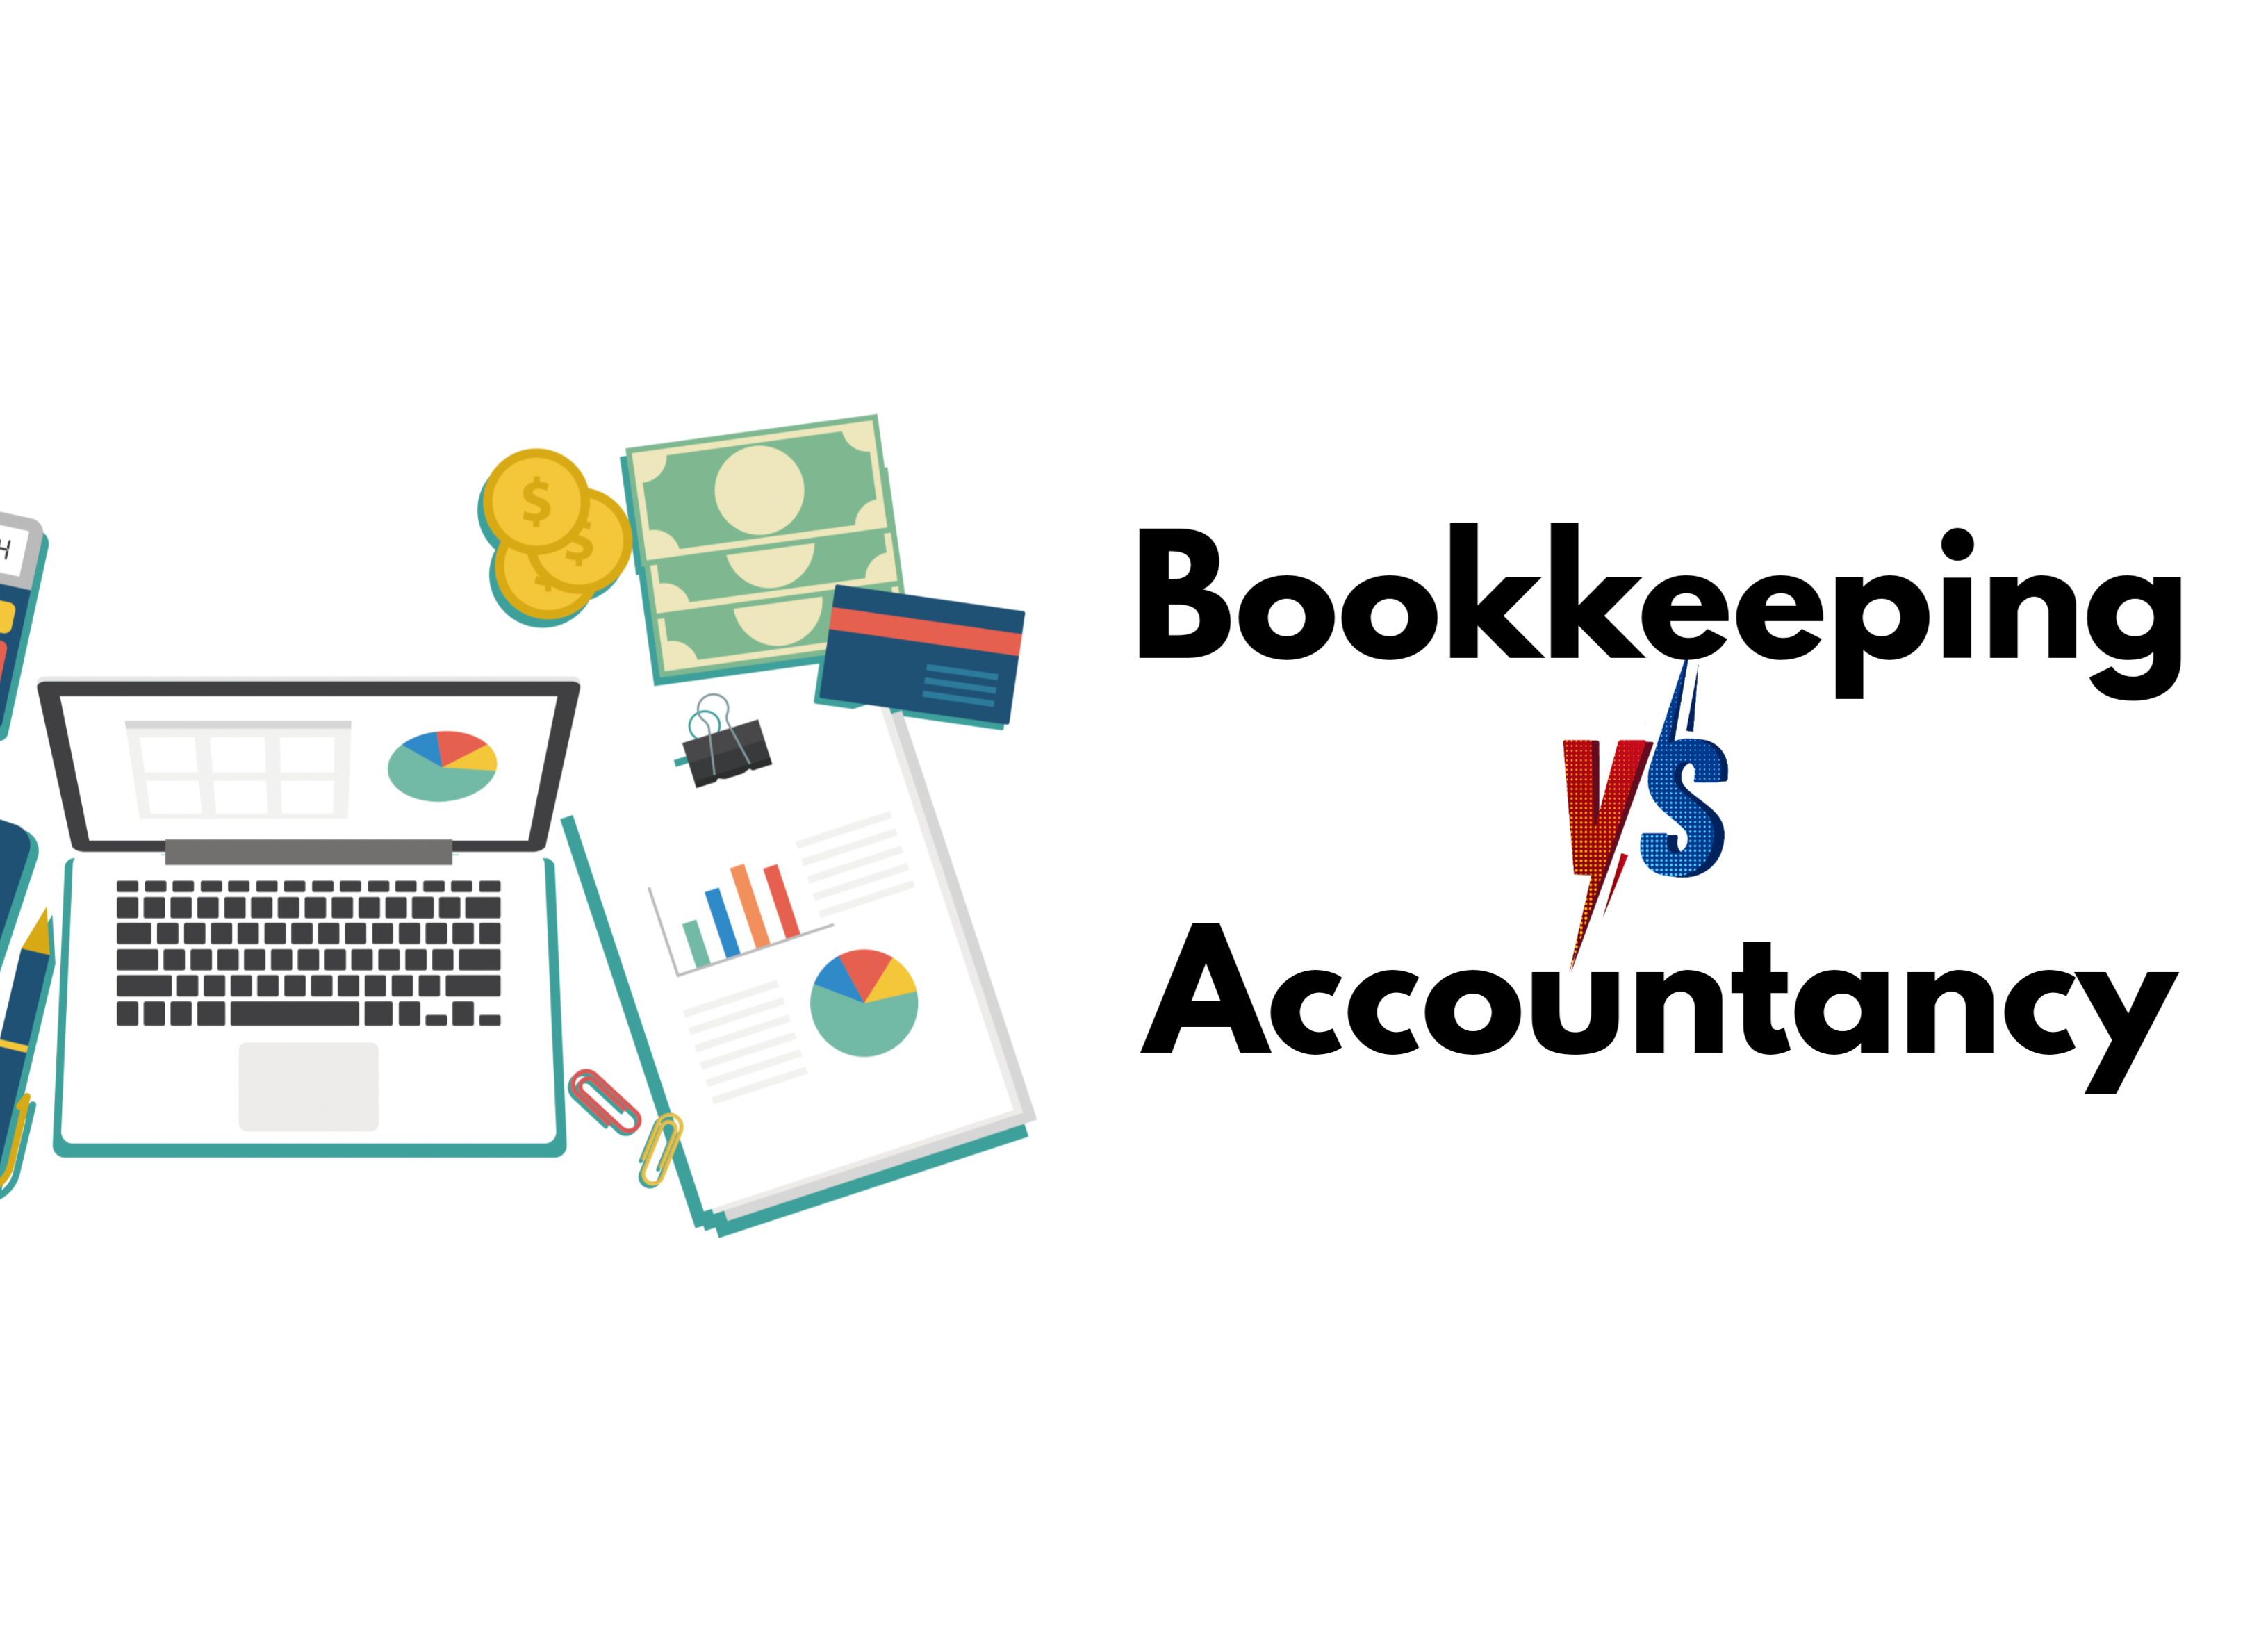 Book keeping and accountancy in Marathi